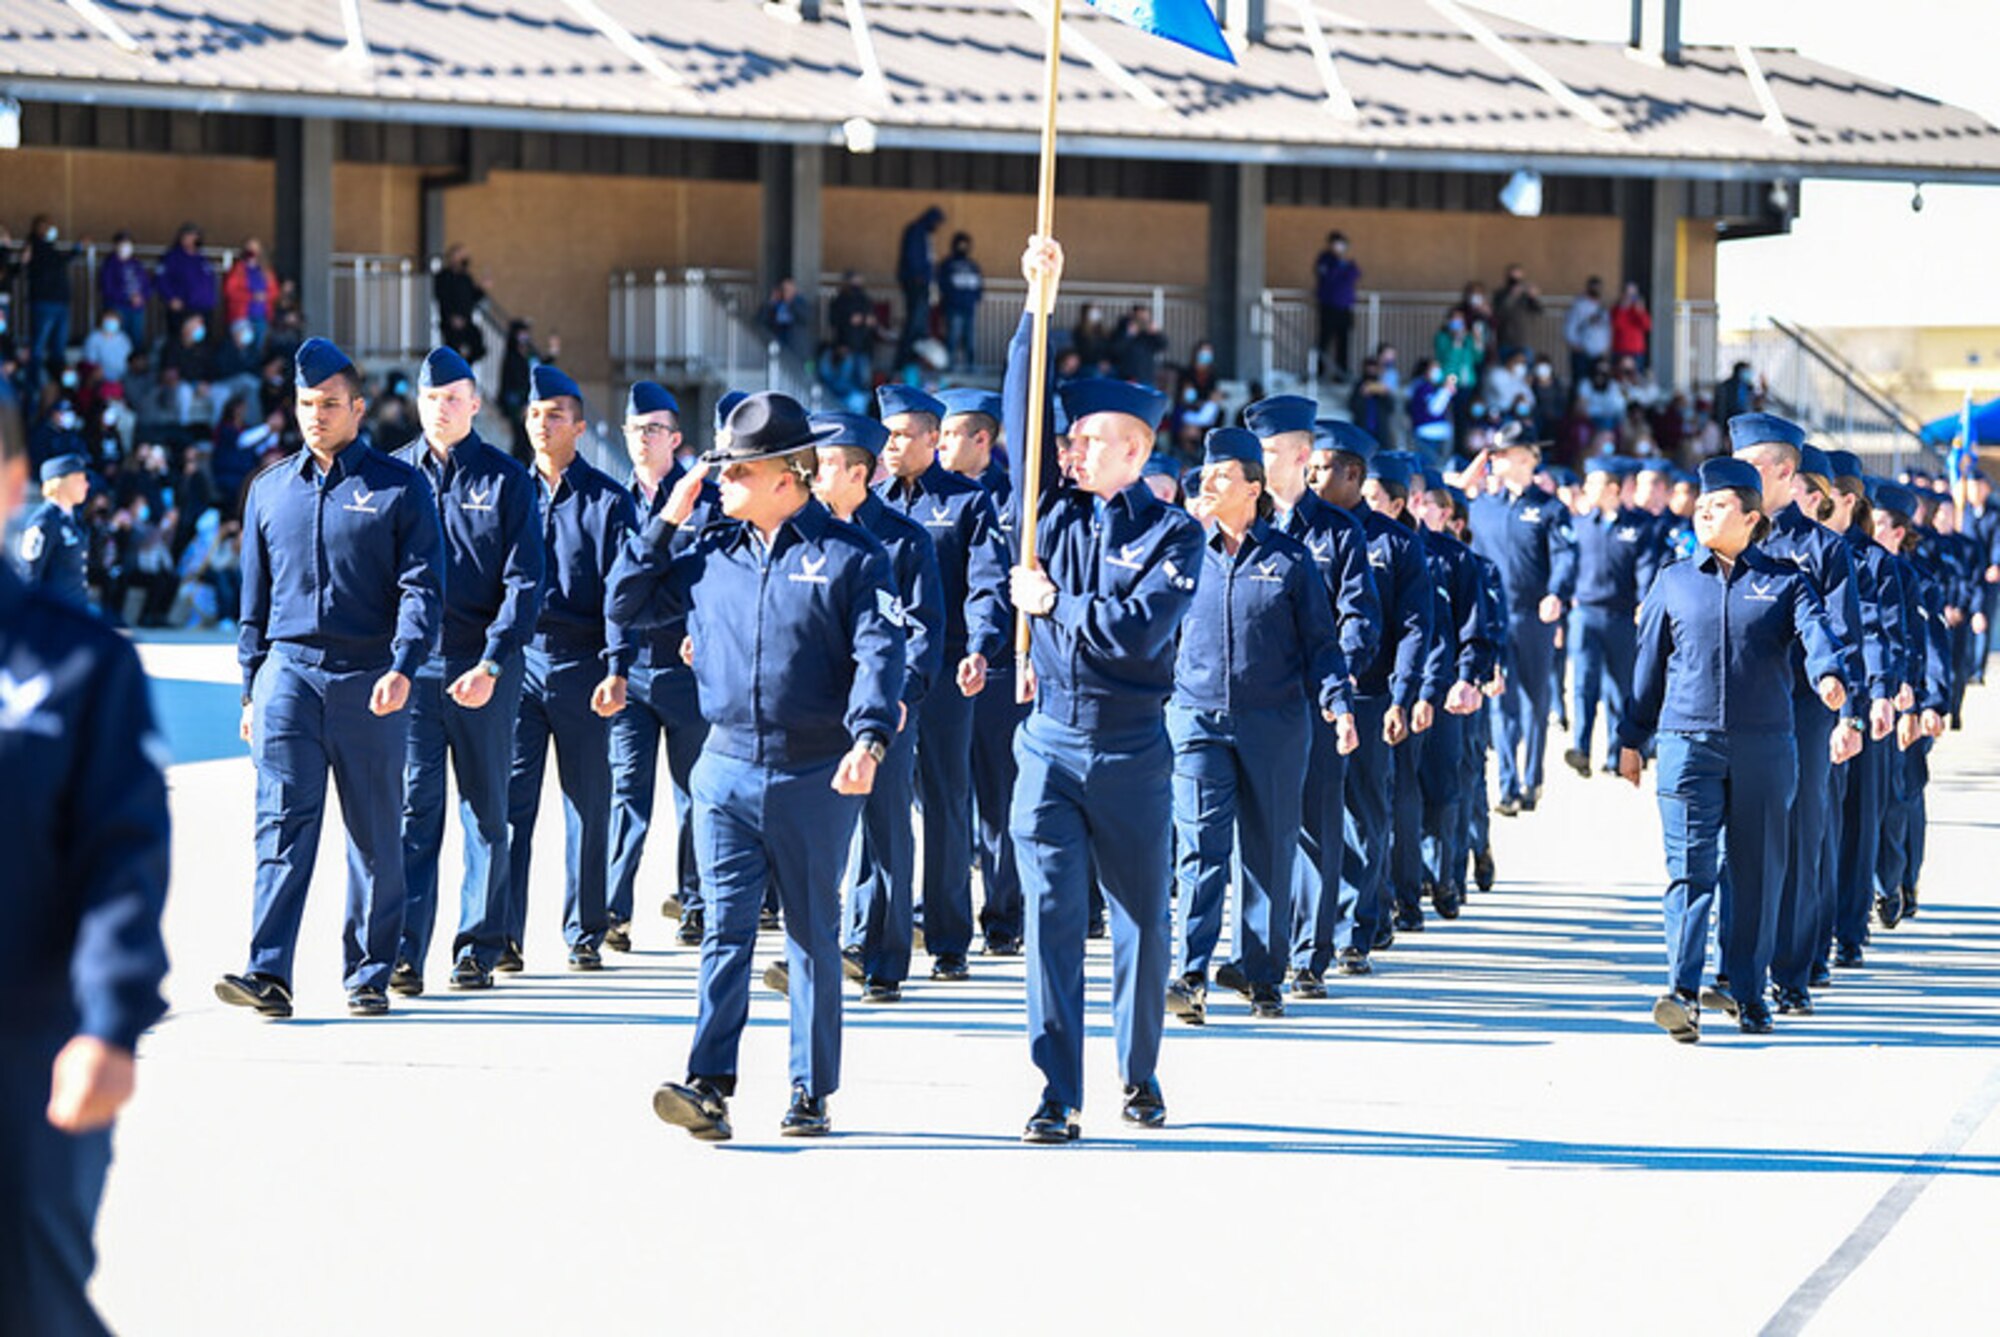 BMT trainees march during their graduation parade.